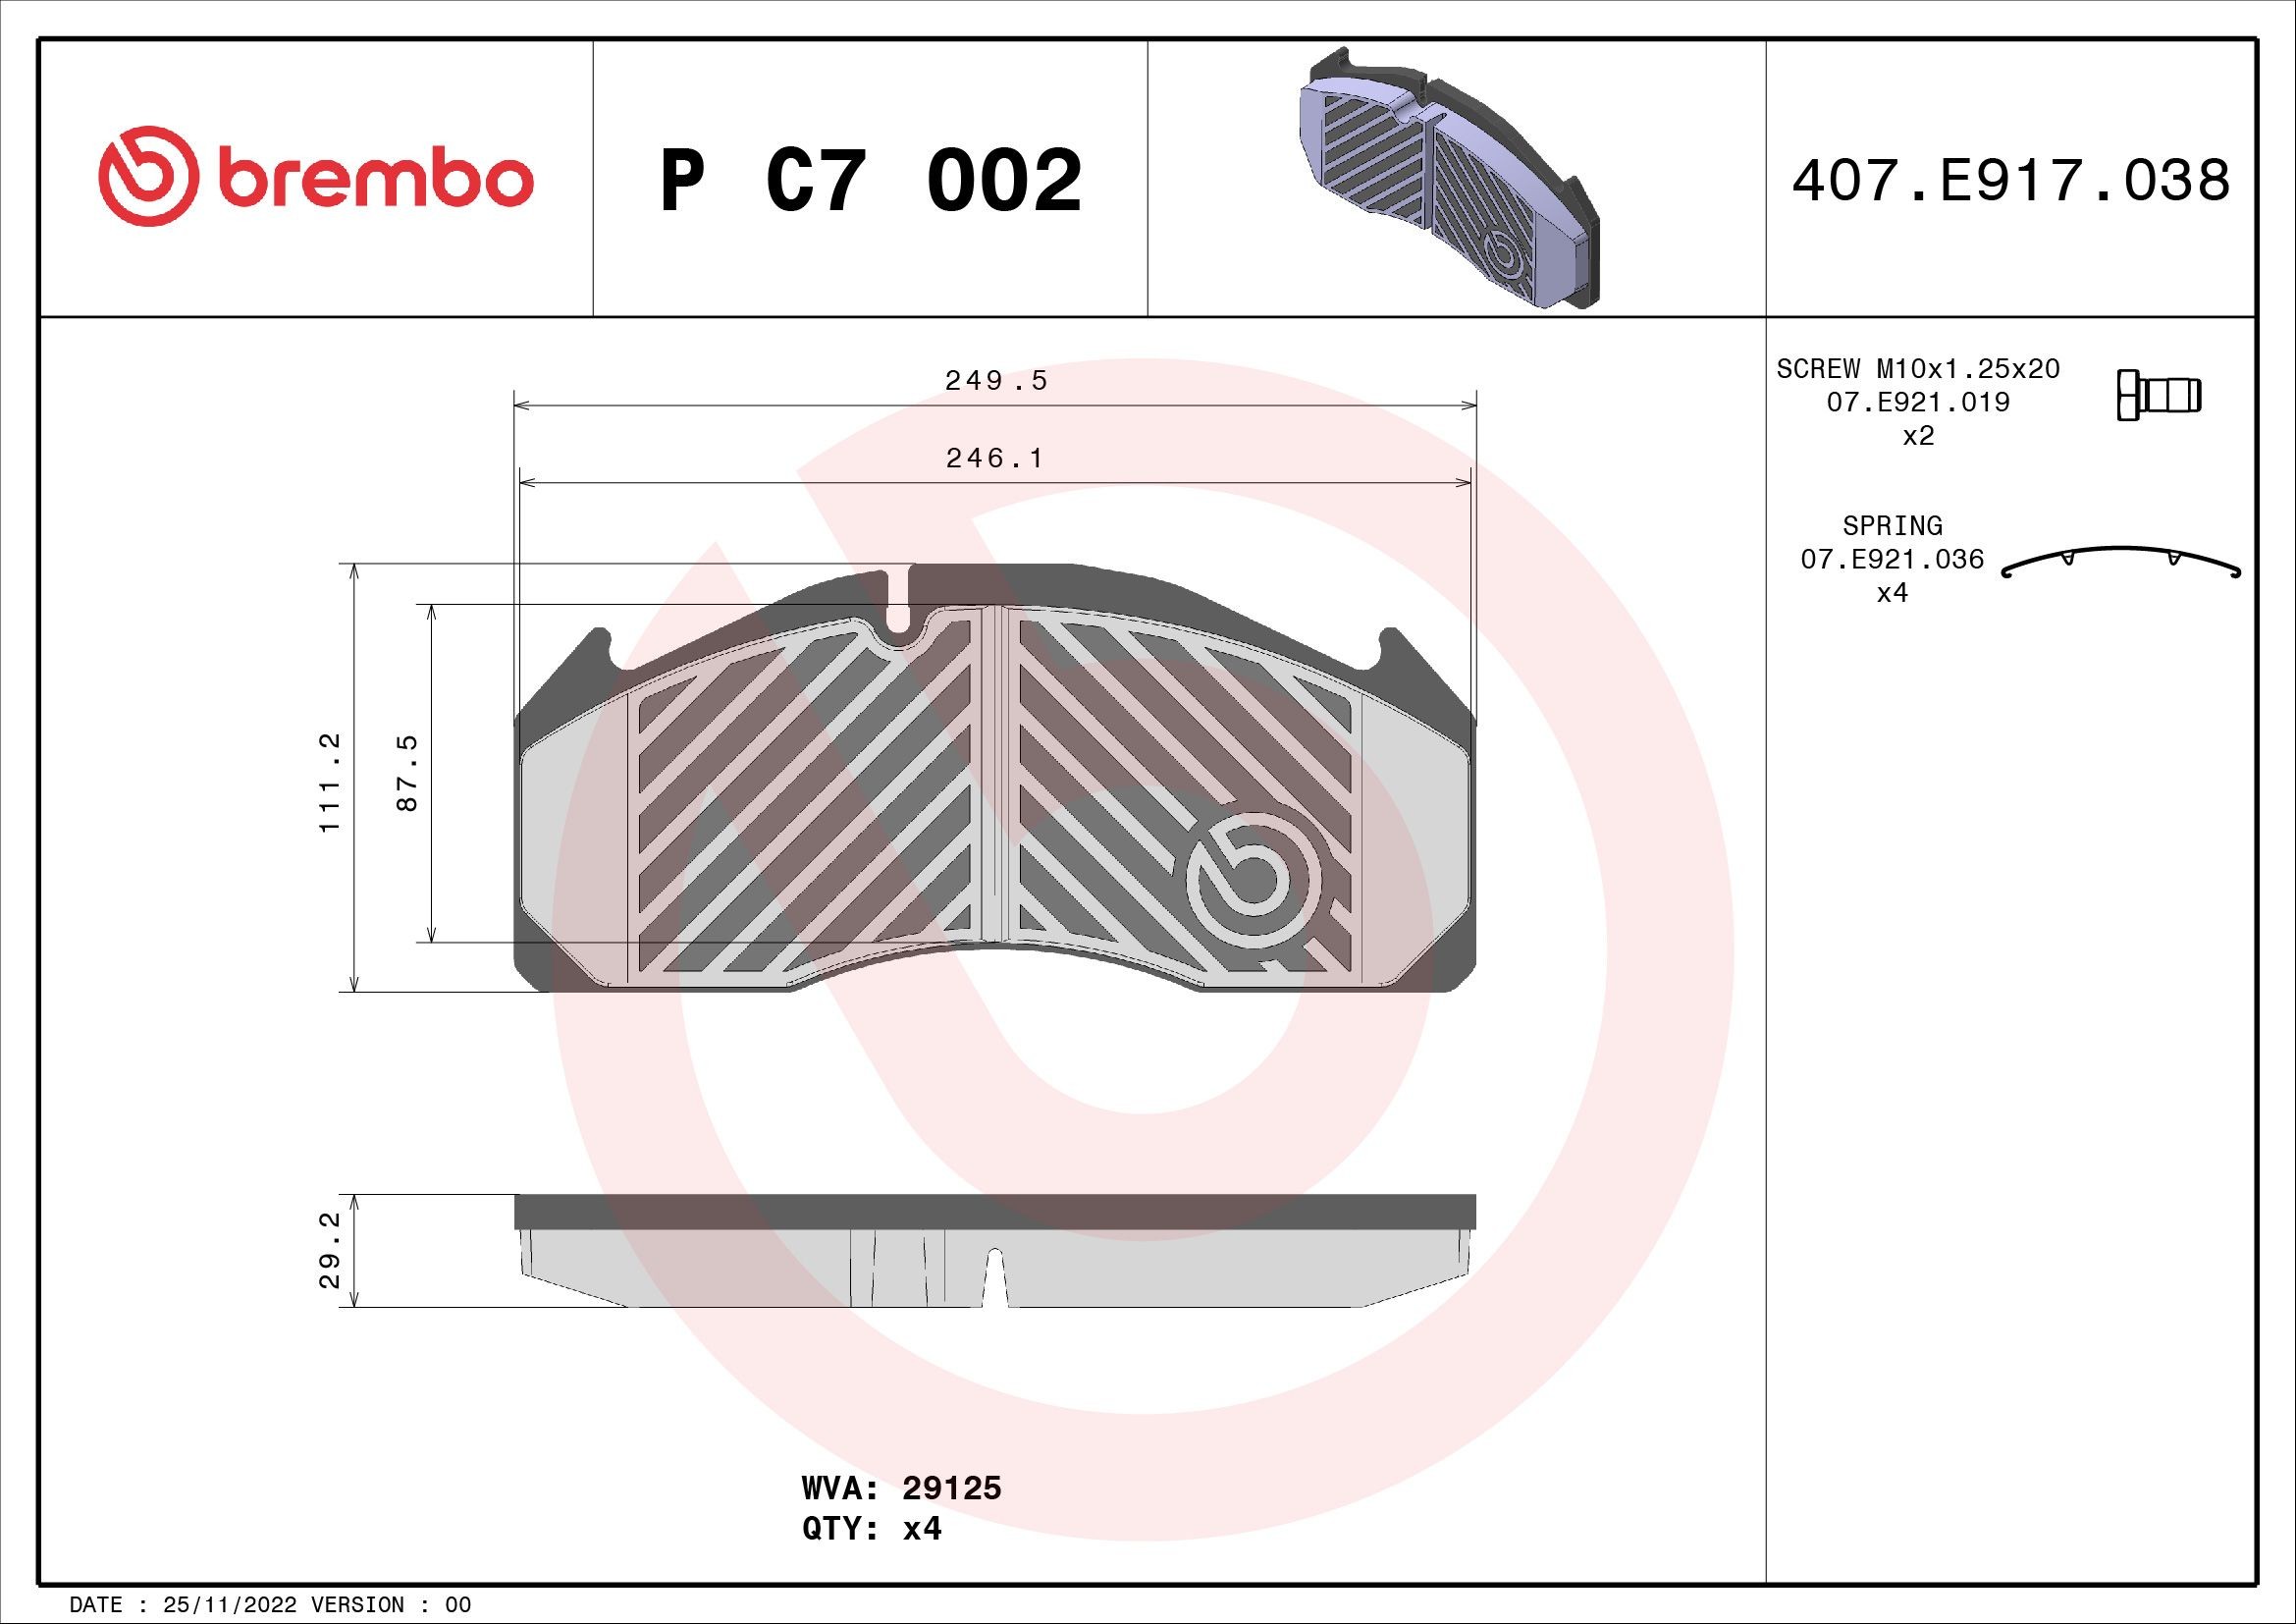 BREMBO prepared for wear indicator, with accessories Height: 111mm, Width: 250mm, Thickness: 29mm Brake pads P C7 002 buy